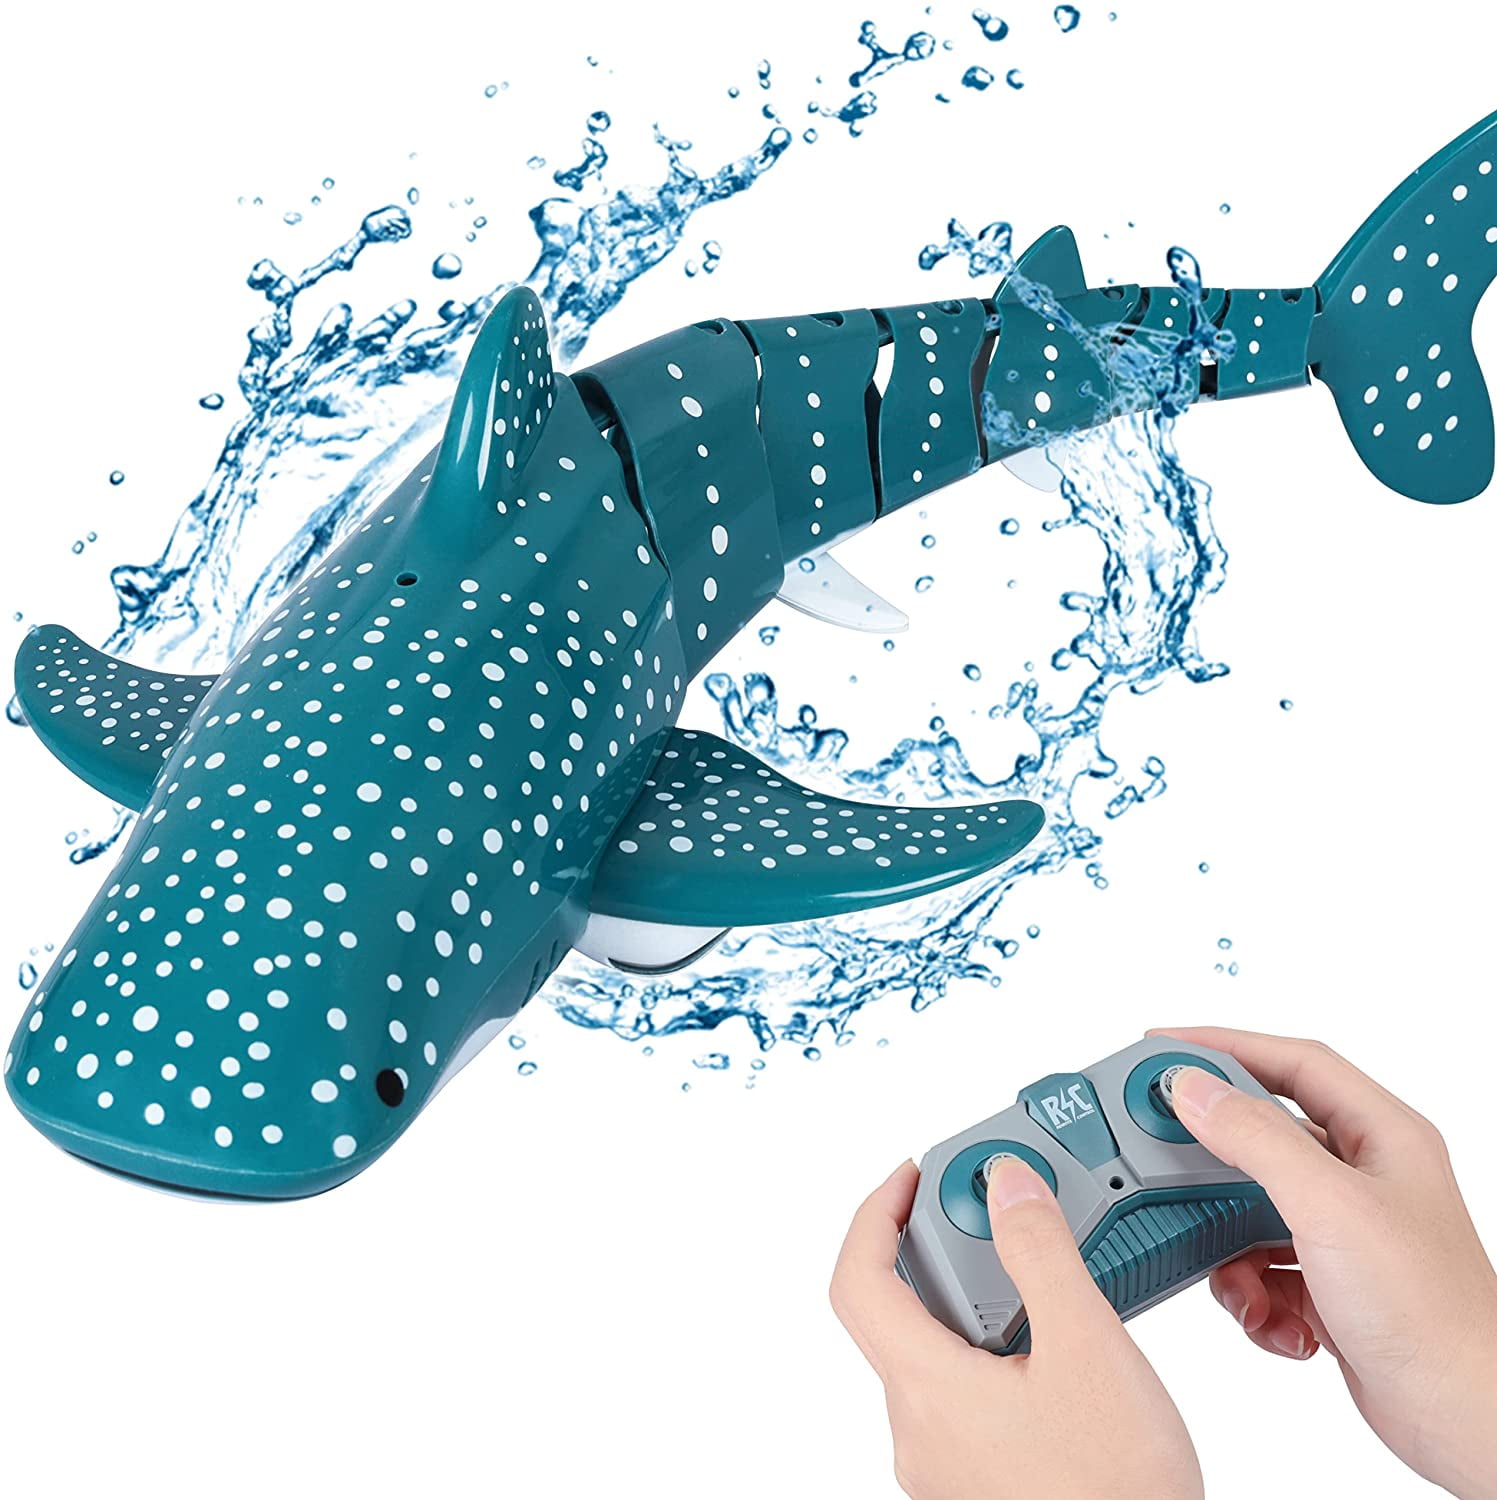 Fishing toys radio remote control electronic shark fish boat durable 4  channel christmas gift, bath toy